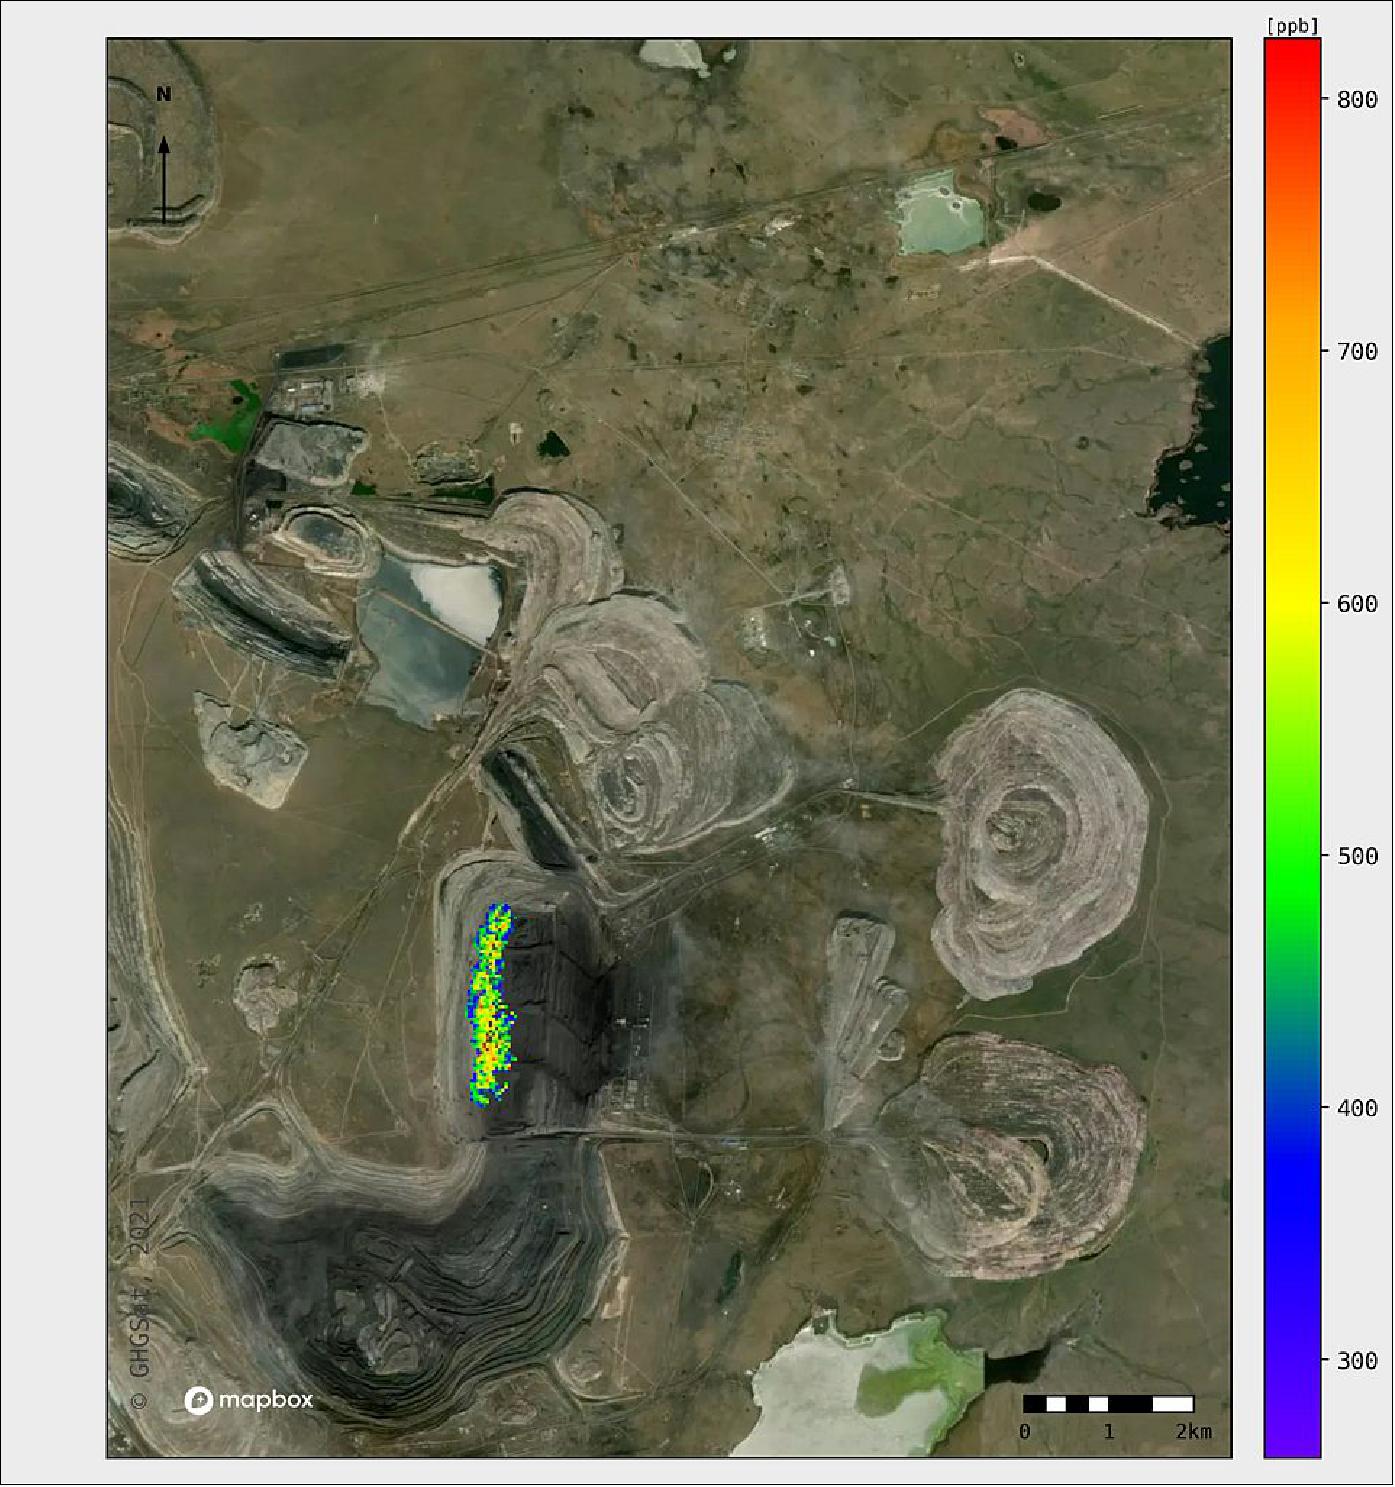 Figure 3: Methane from opencast coal mine in Kazakhstan measured by GHGSat. With both public and commercial satellite data playing key roles in assessing progress on climate action, ESA and GHGSat are supporting the United Nations Environment Programme's new International Methane Emissions Observatory. Copernicus Sentinel-5P's high revisit rate combined with GHGSat's high-resolution commercial imagery can give landfill operators and regulators the information they need to reduce methane emissions from landfill sites, for example. Both missions support the new International Methane Emissions Observatory. This image shows methane from an opencast coal mine in Kazakhstan on 20 October 2021, measured by GHGSat.